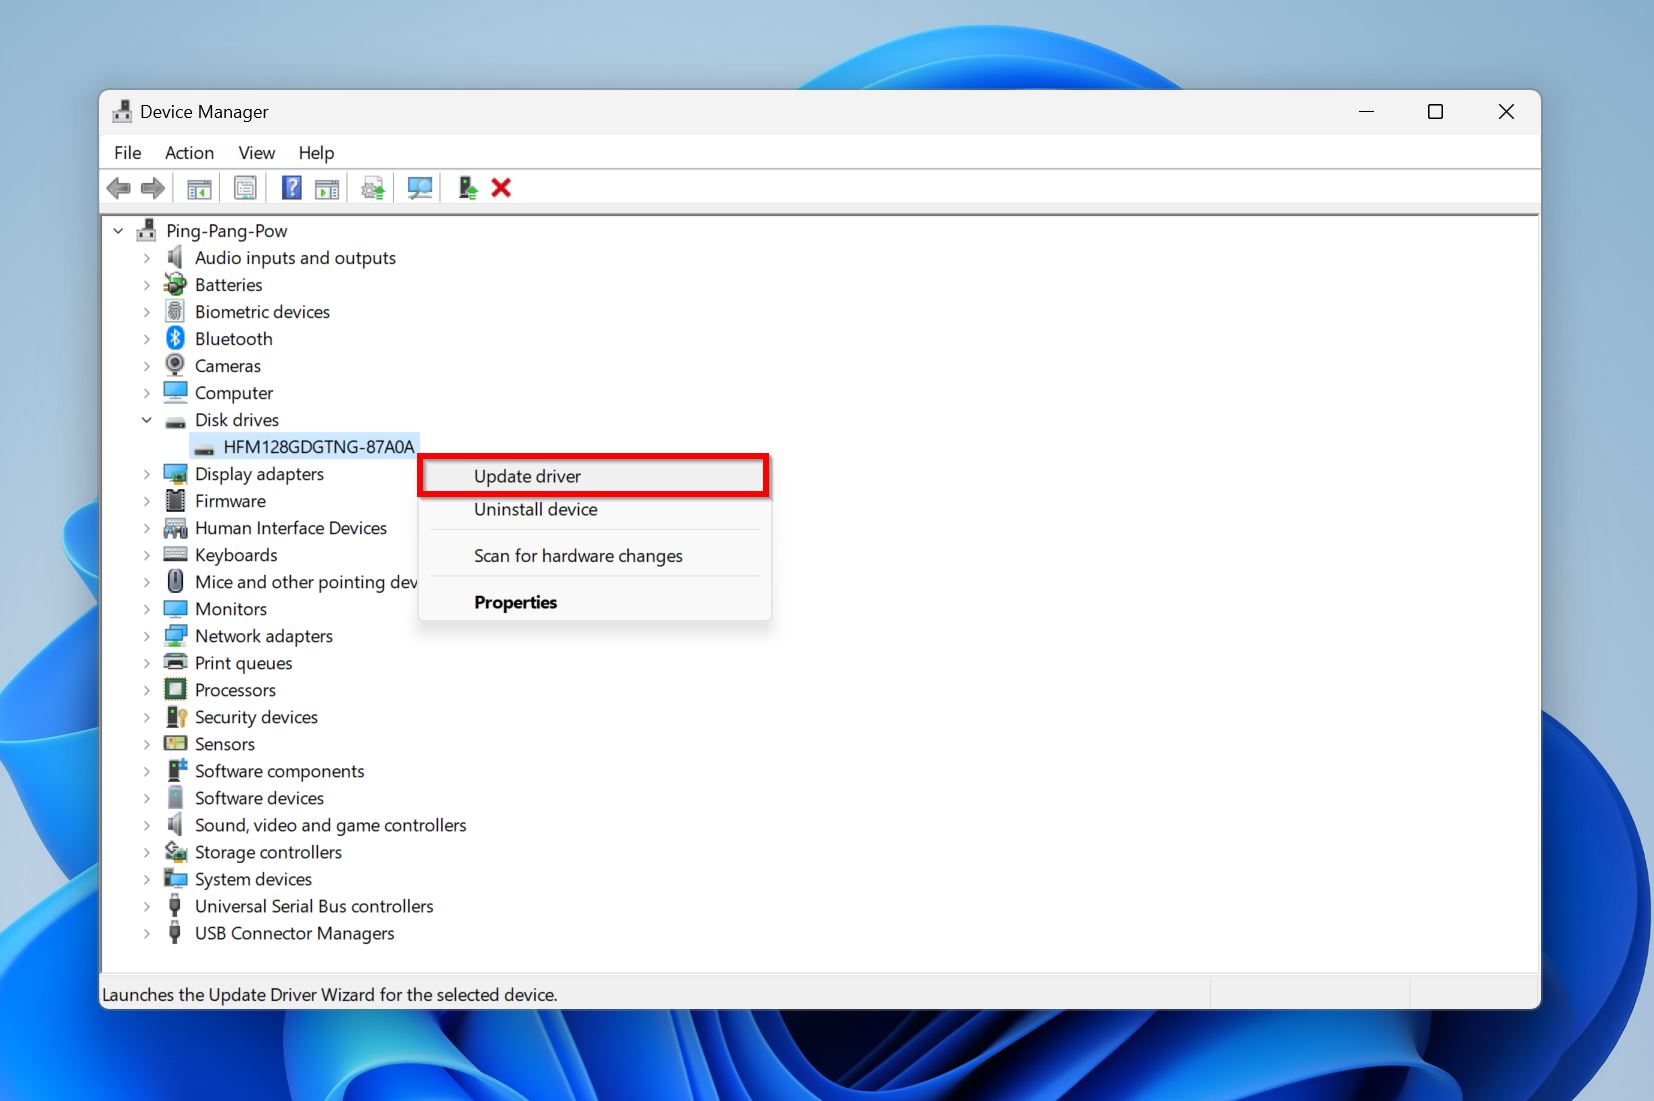 Update driver option in Device Manager.